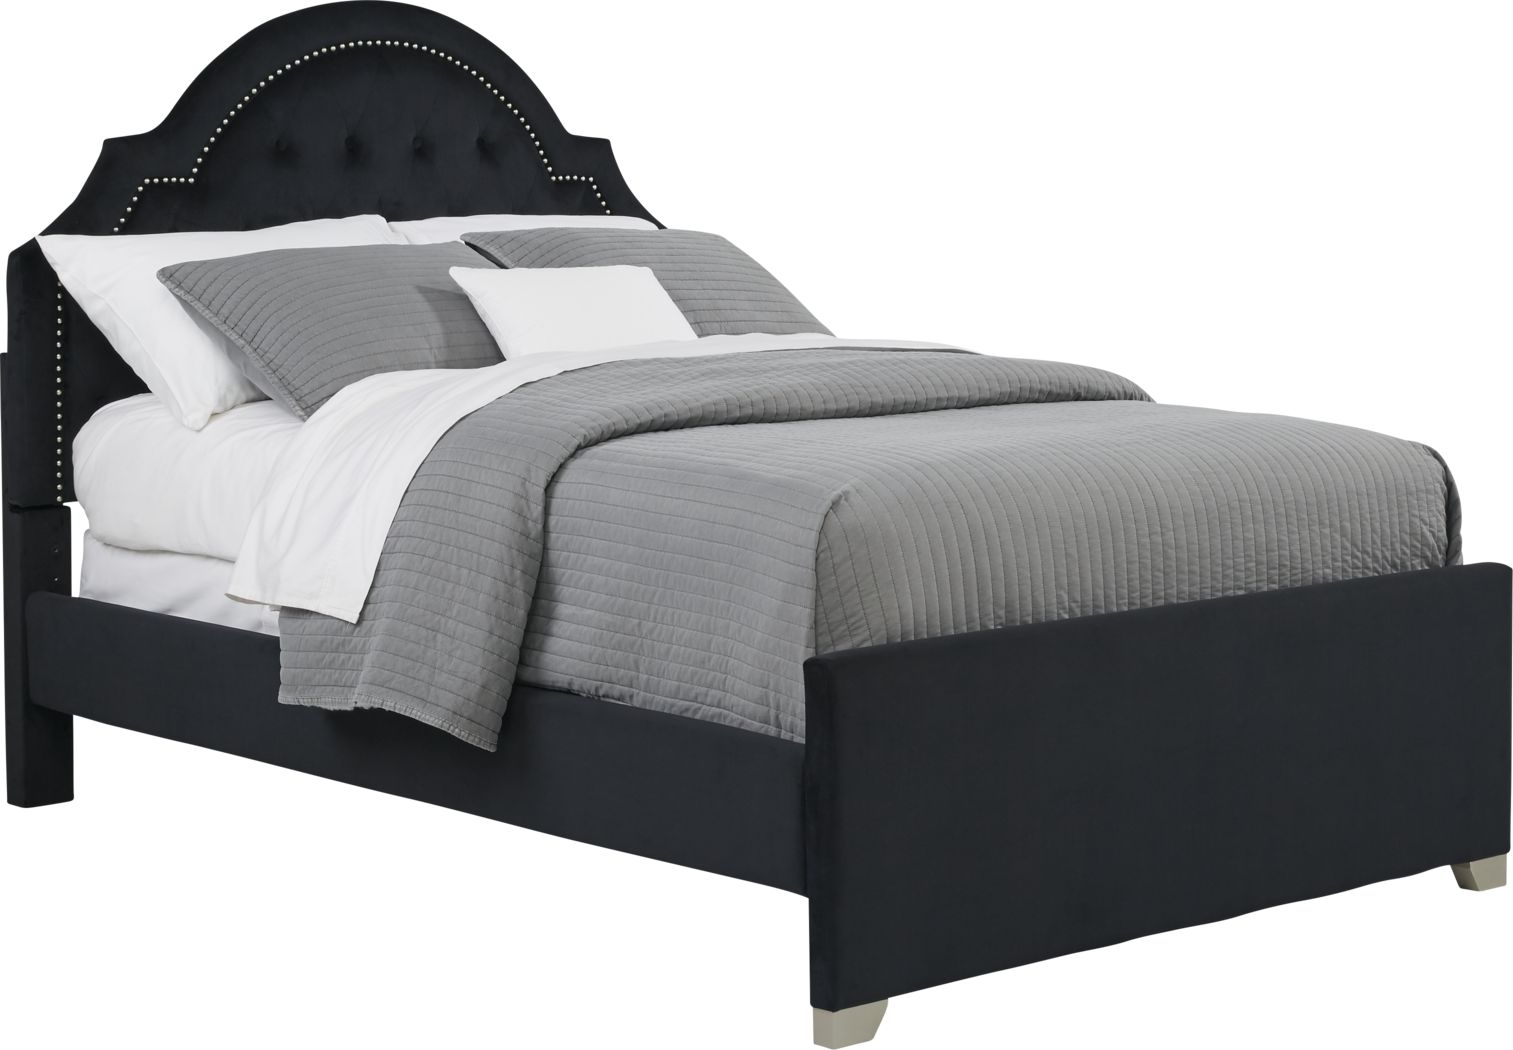 Black Twin Size Single Beds Frames, Black Upholstered Twin Bed Frame With Headboard